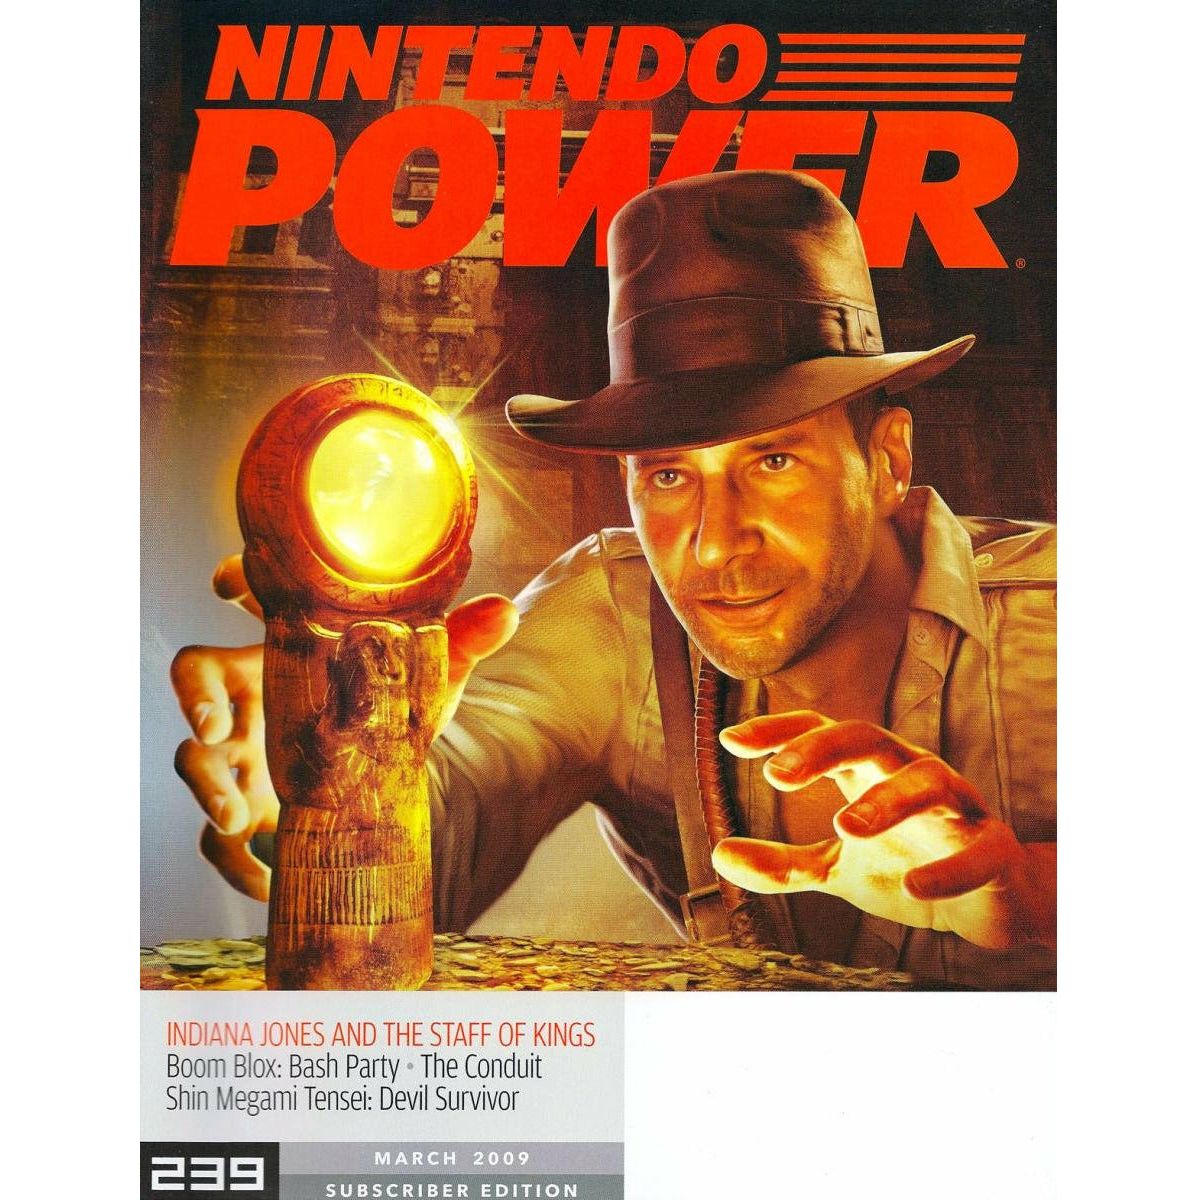 Nintendo Power Magazine (#239 Subscriber Edition) - Complete and/or Good Condition